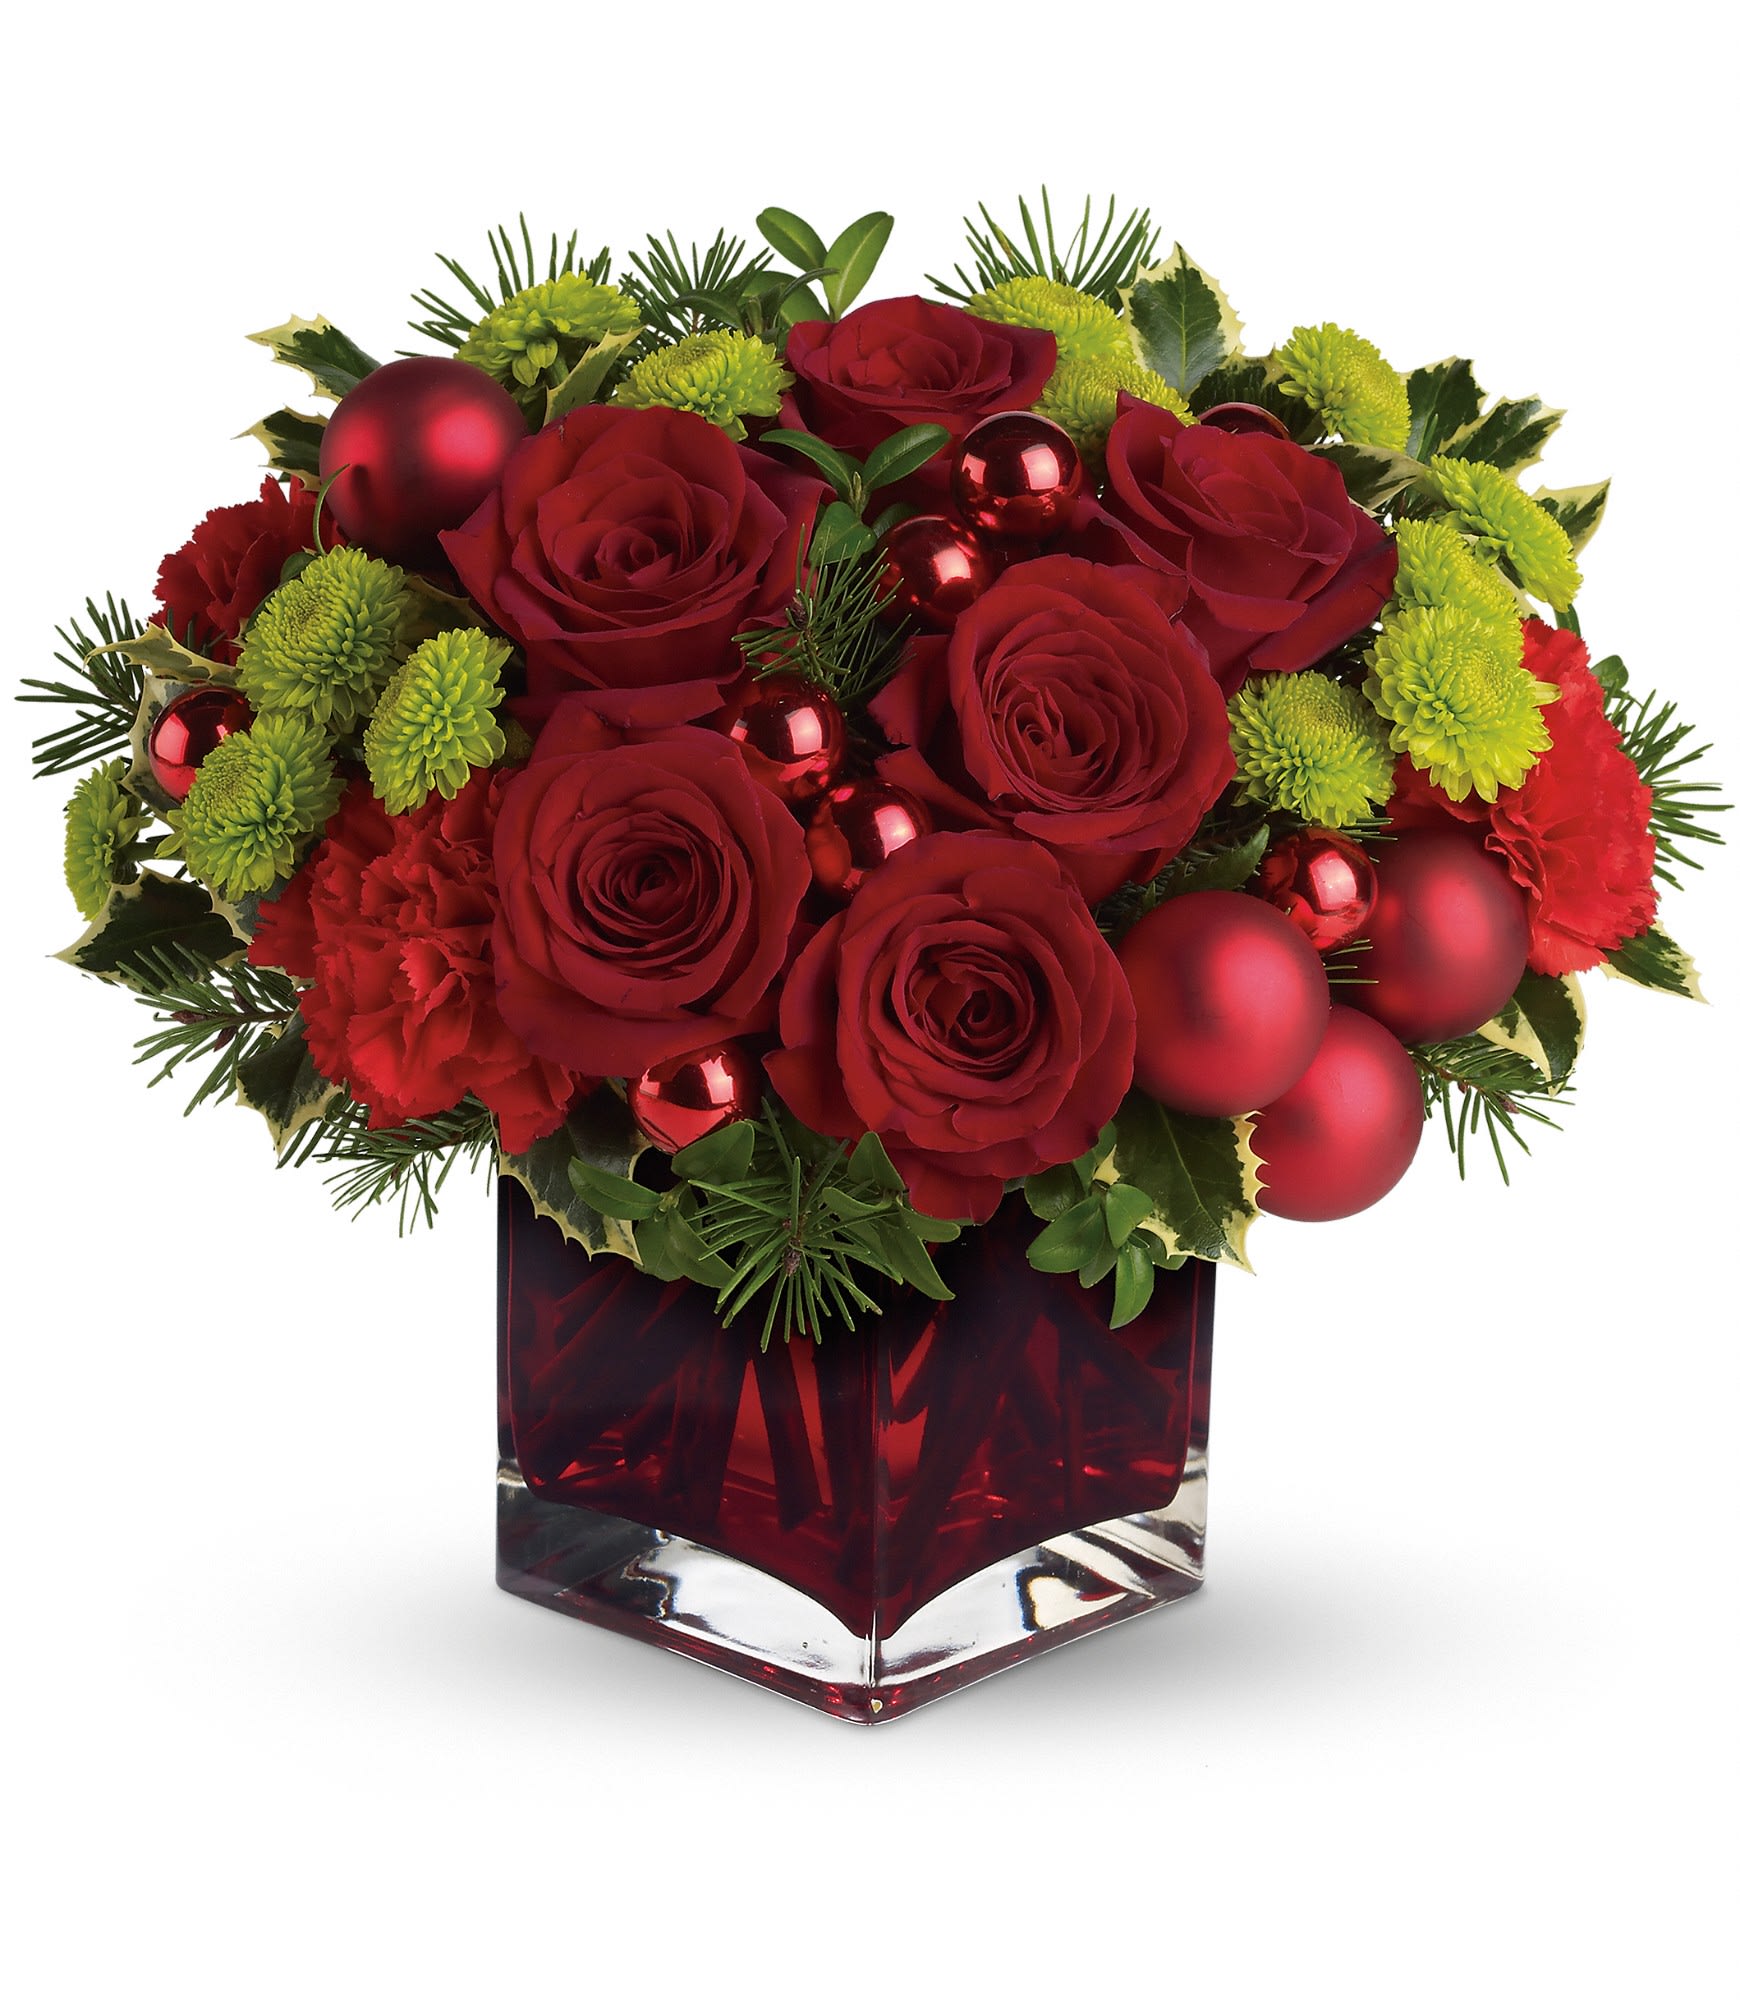 Teleflora's Merry &amp; Bright - Gorgeous red roses and carnations along with brilliant green button chrysanthemums, shiny red ornament balls and winter greens are perfectly arranged in this very merry Christmas cube. Approximately 13&quot; W x 11 1/2&quot; H. T125-1